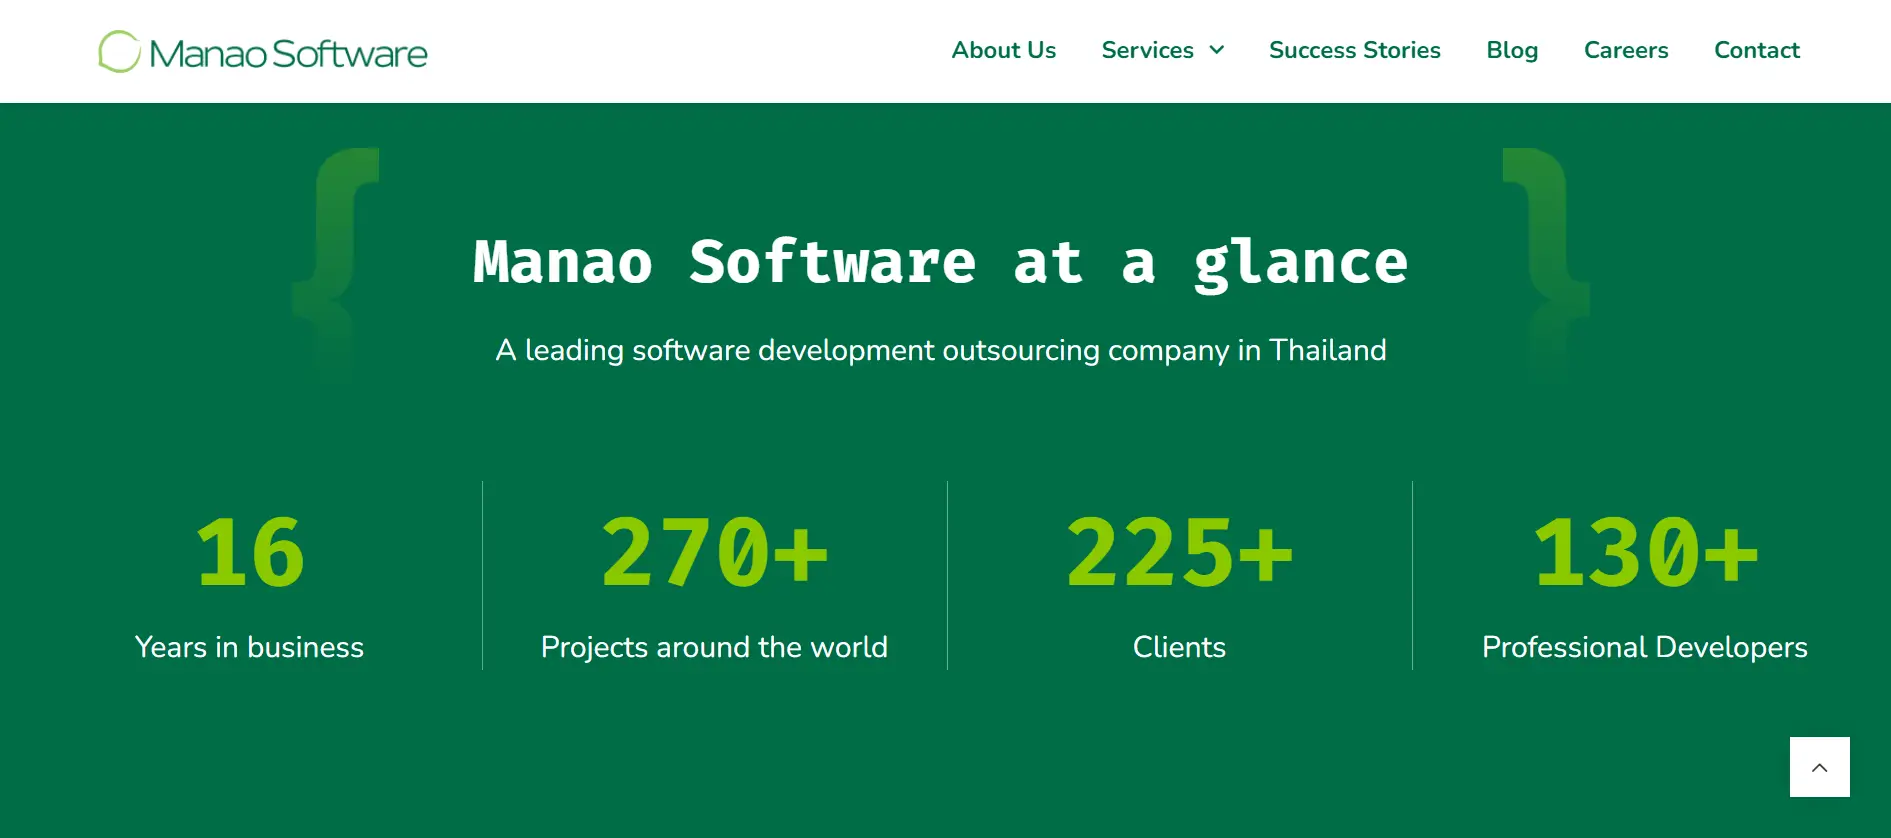 Software Development Company in Thailand - Manao Software